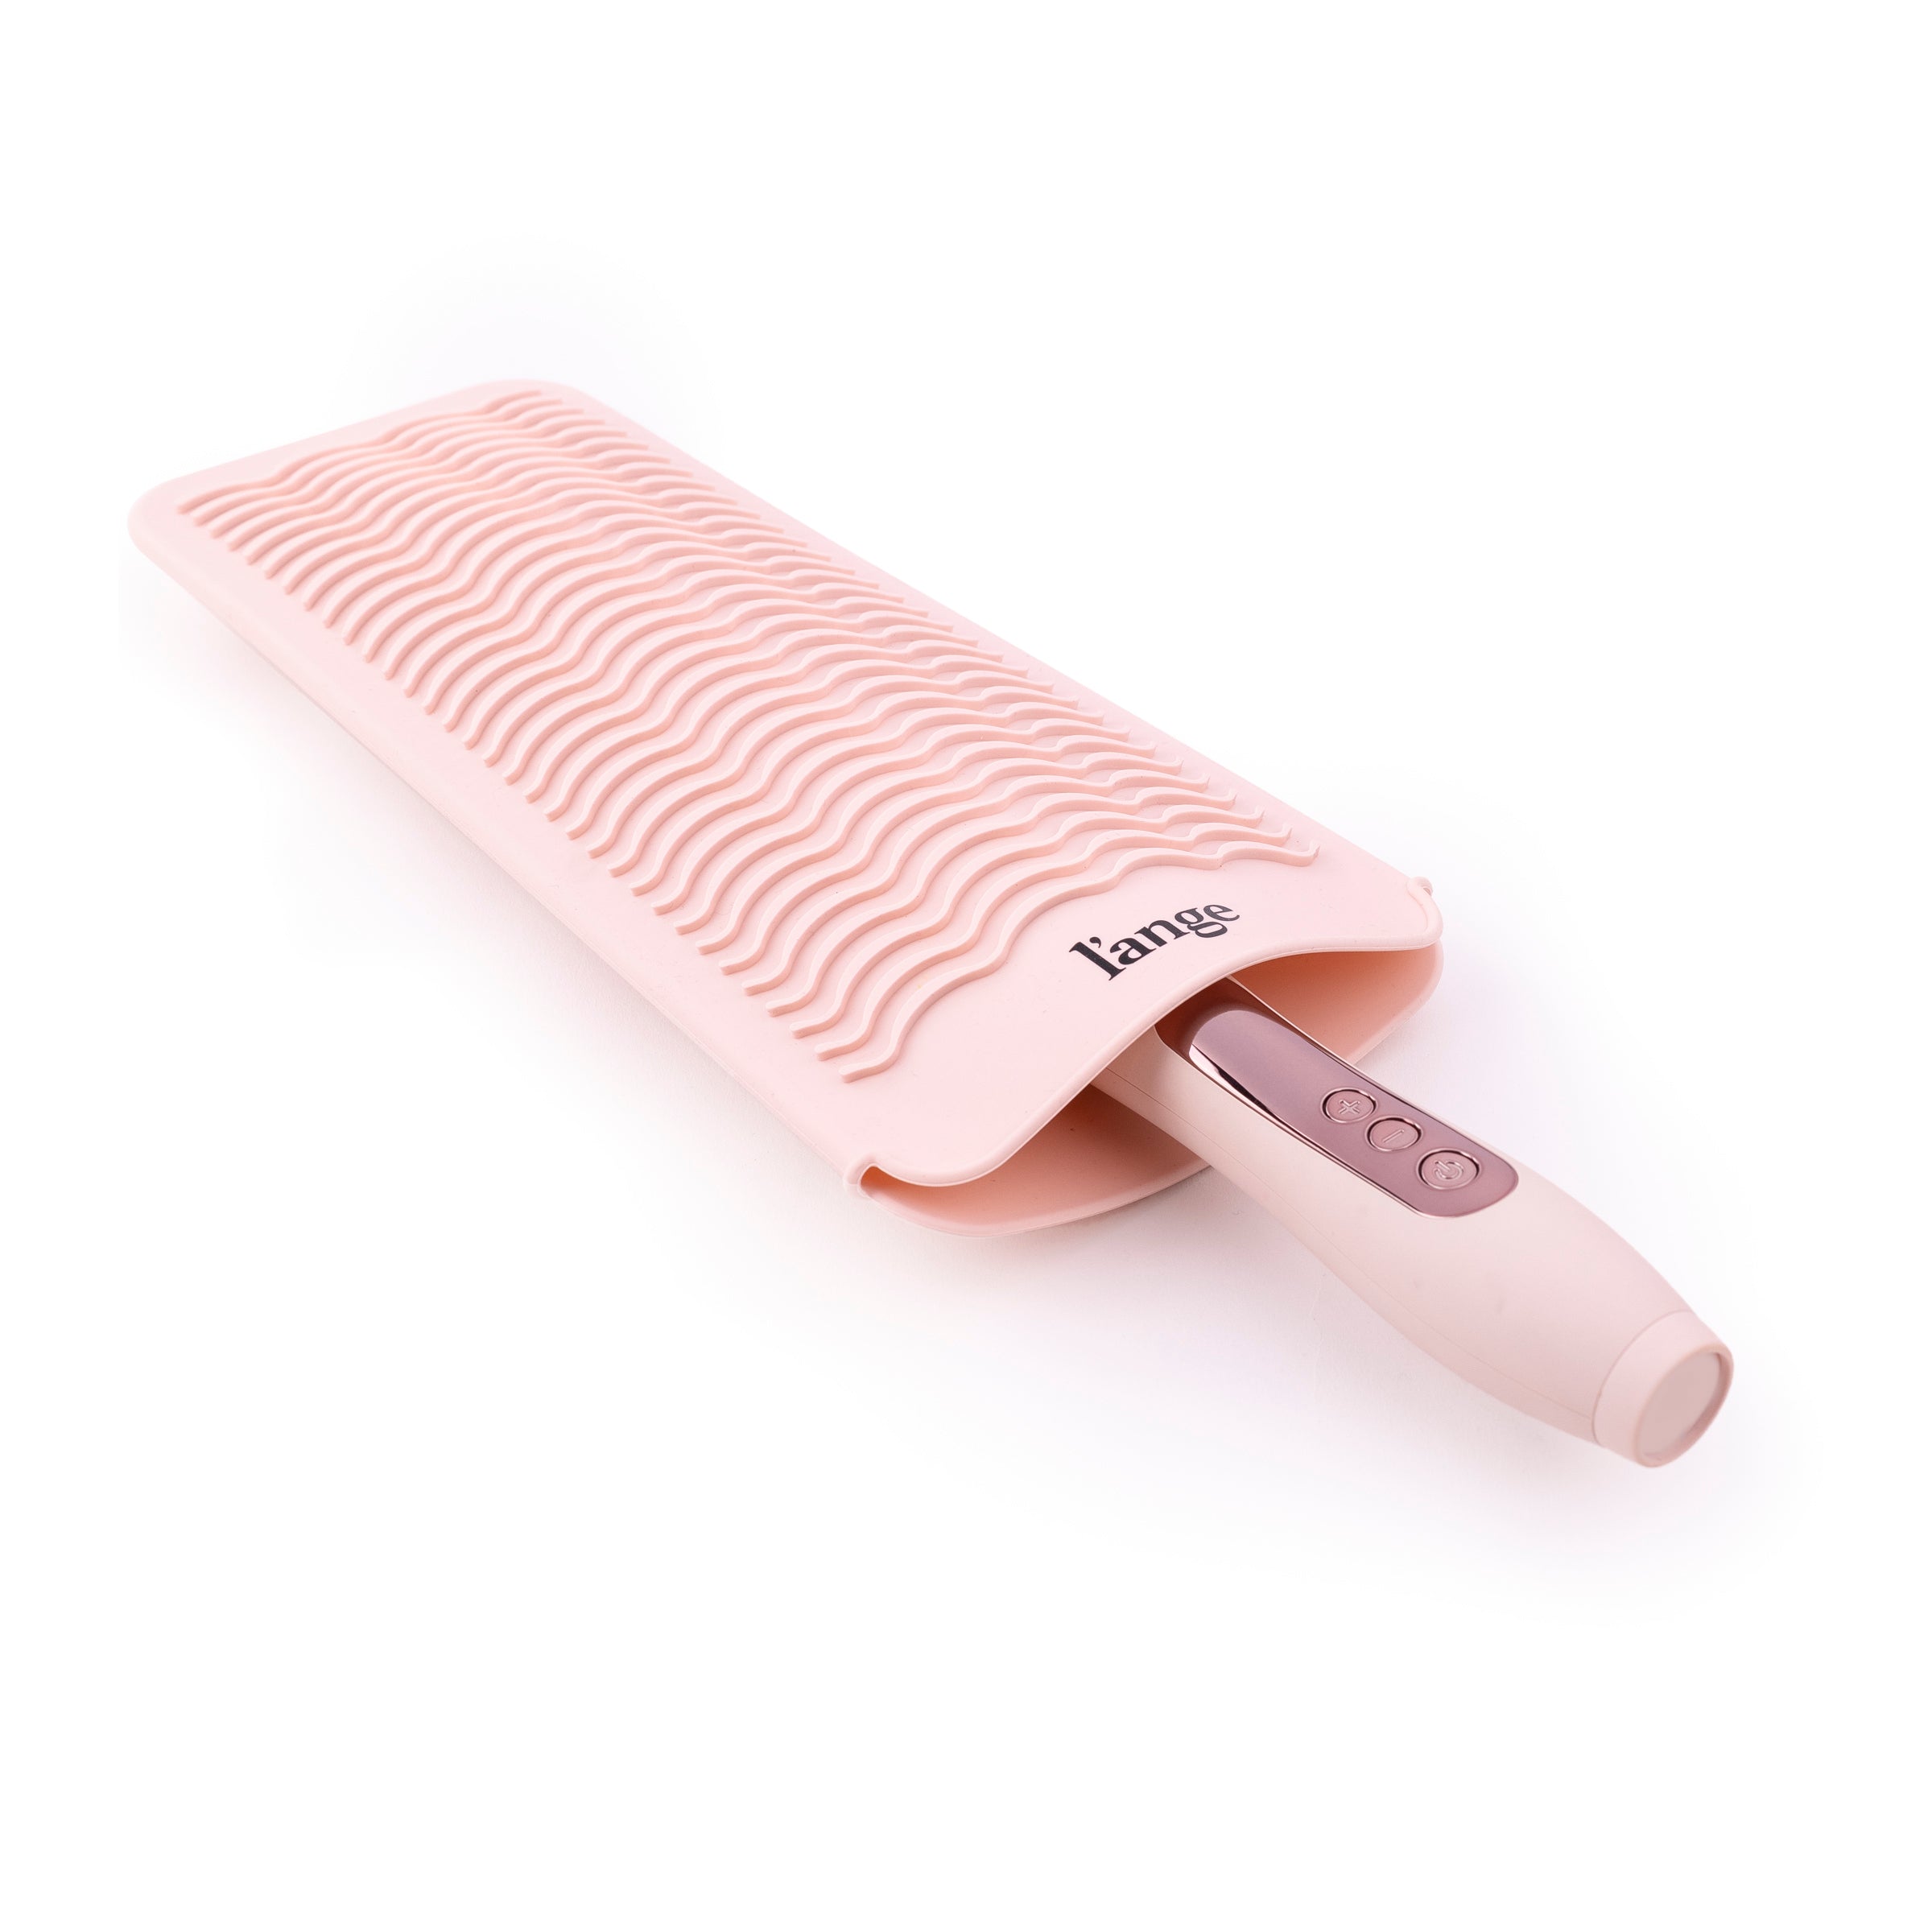 Jygee Silicone Mat Heat Resistant Curling Iron Pouch Hair